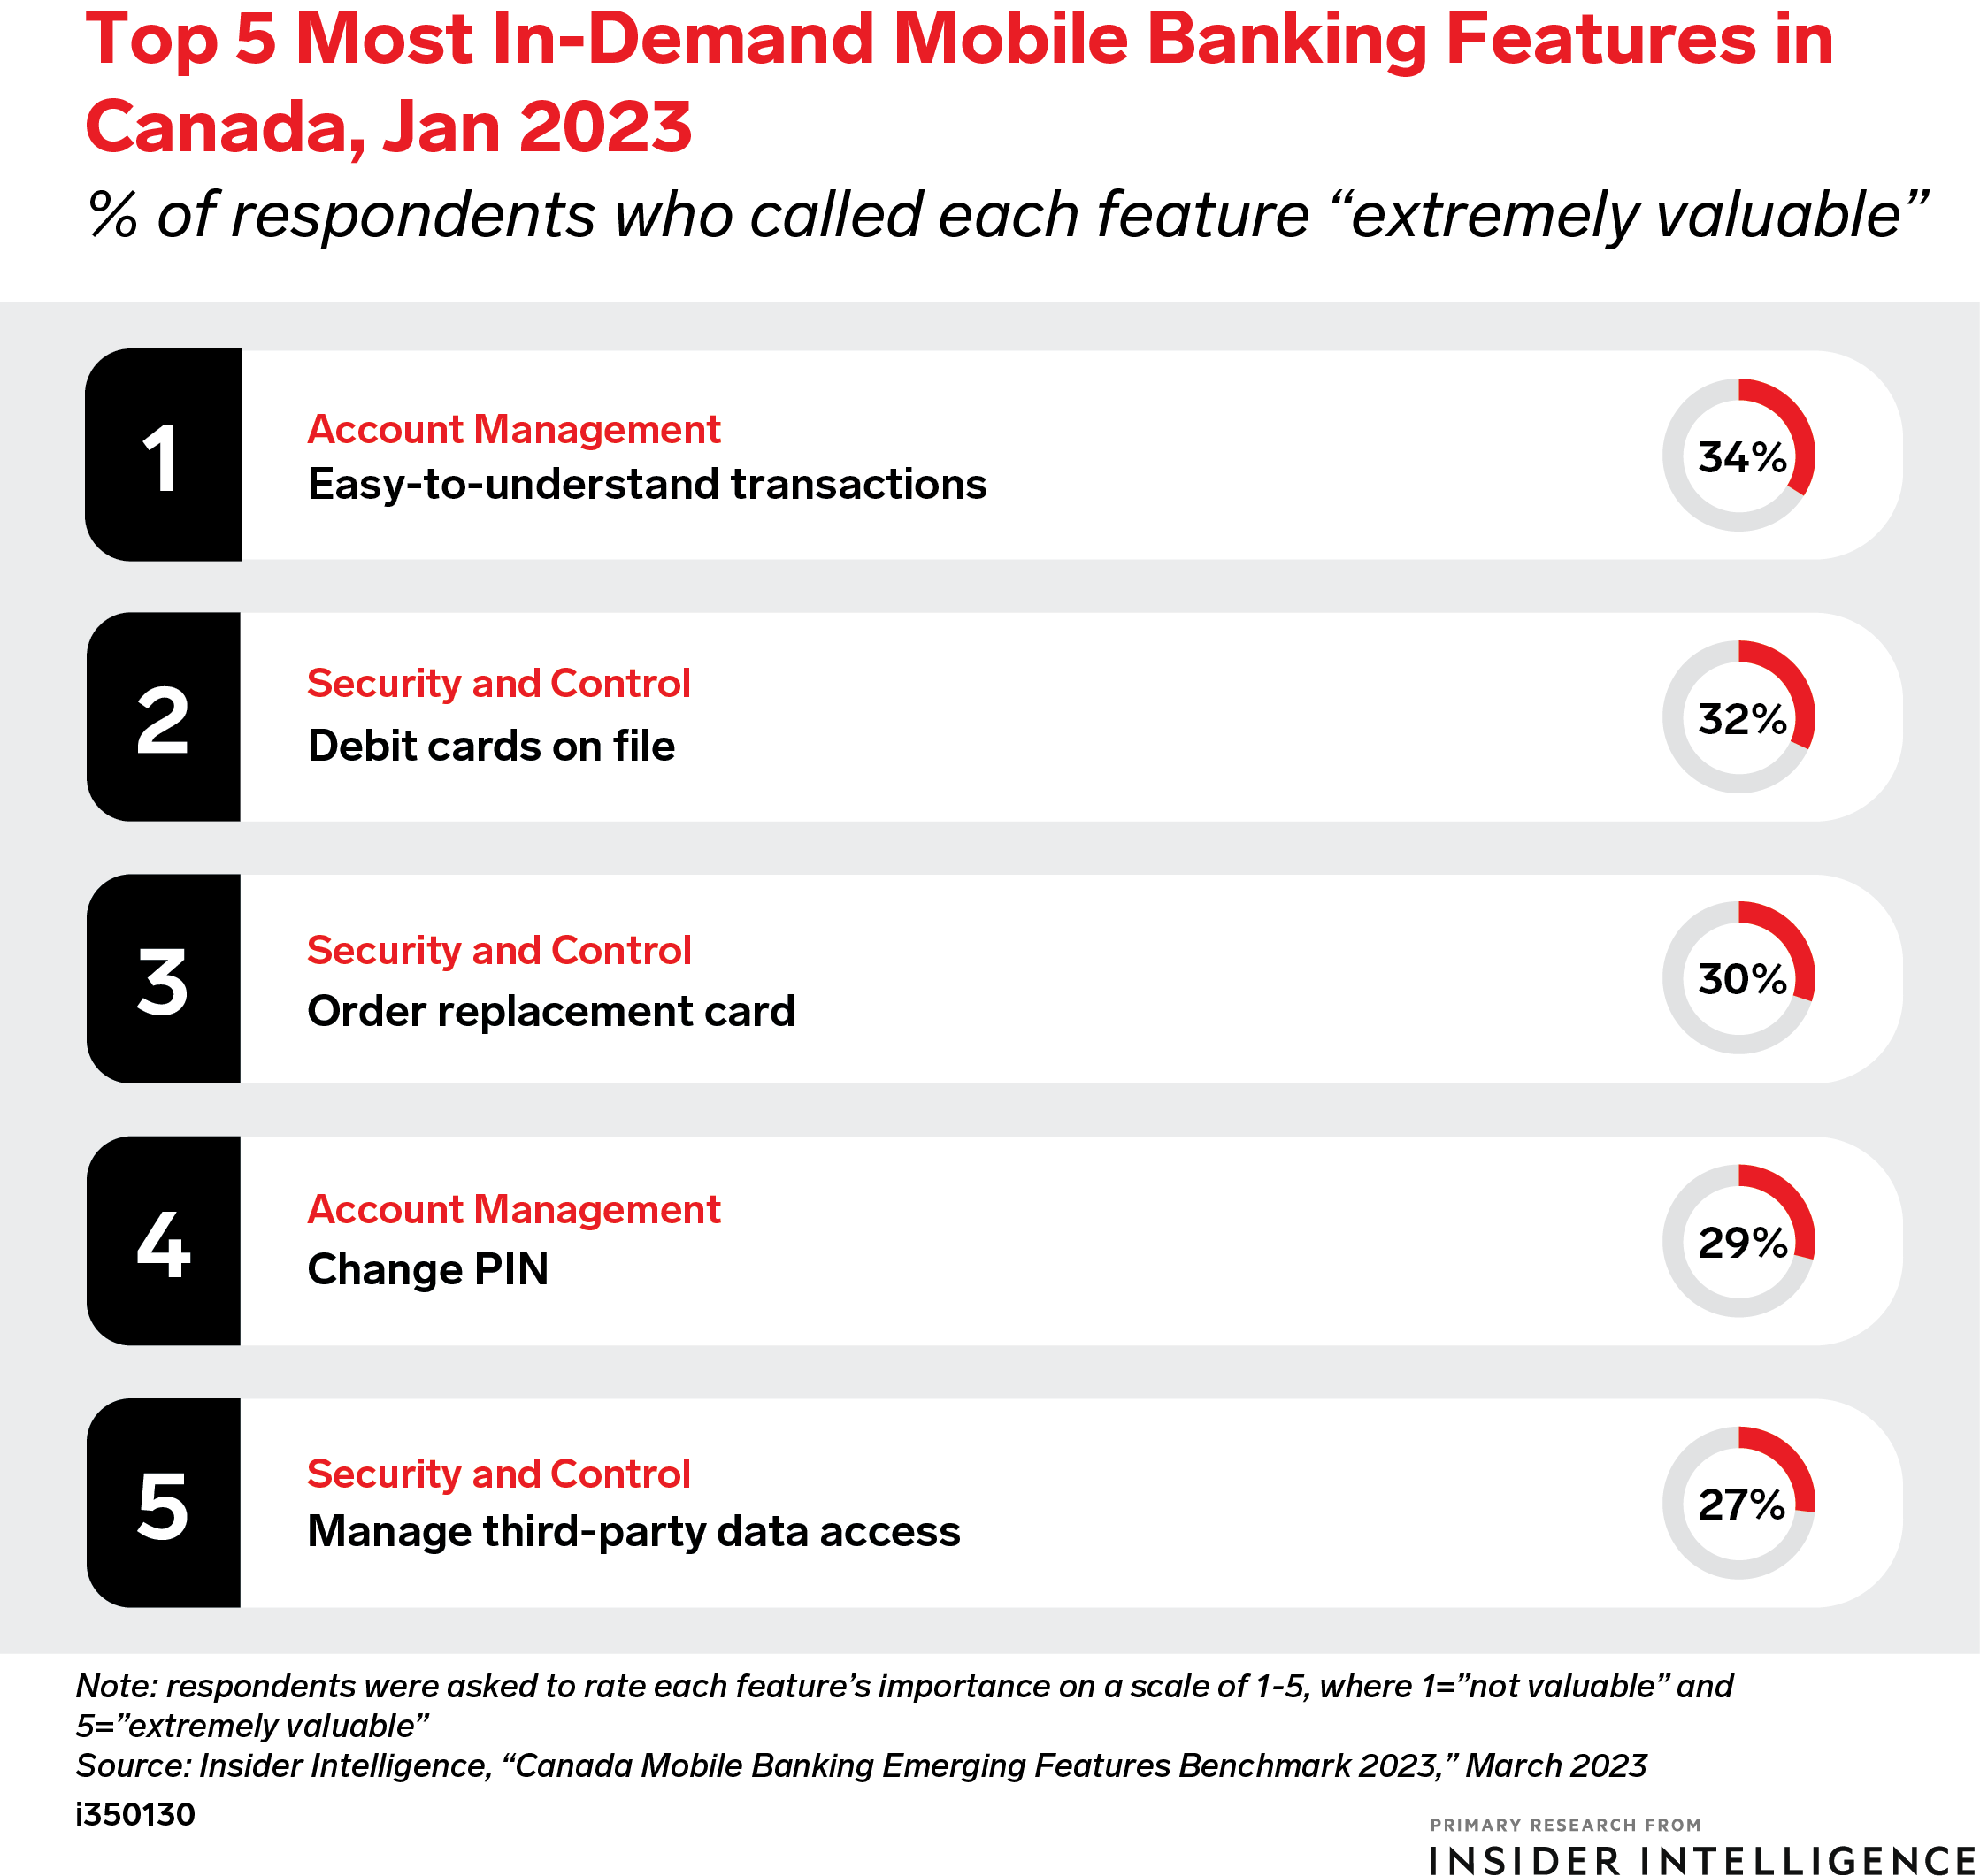 Top 5 Most In-Demand Mobile Banking Features in Canada, Jan 2023